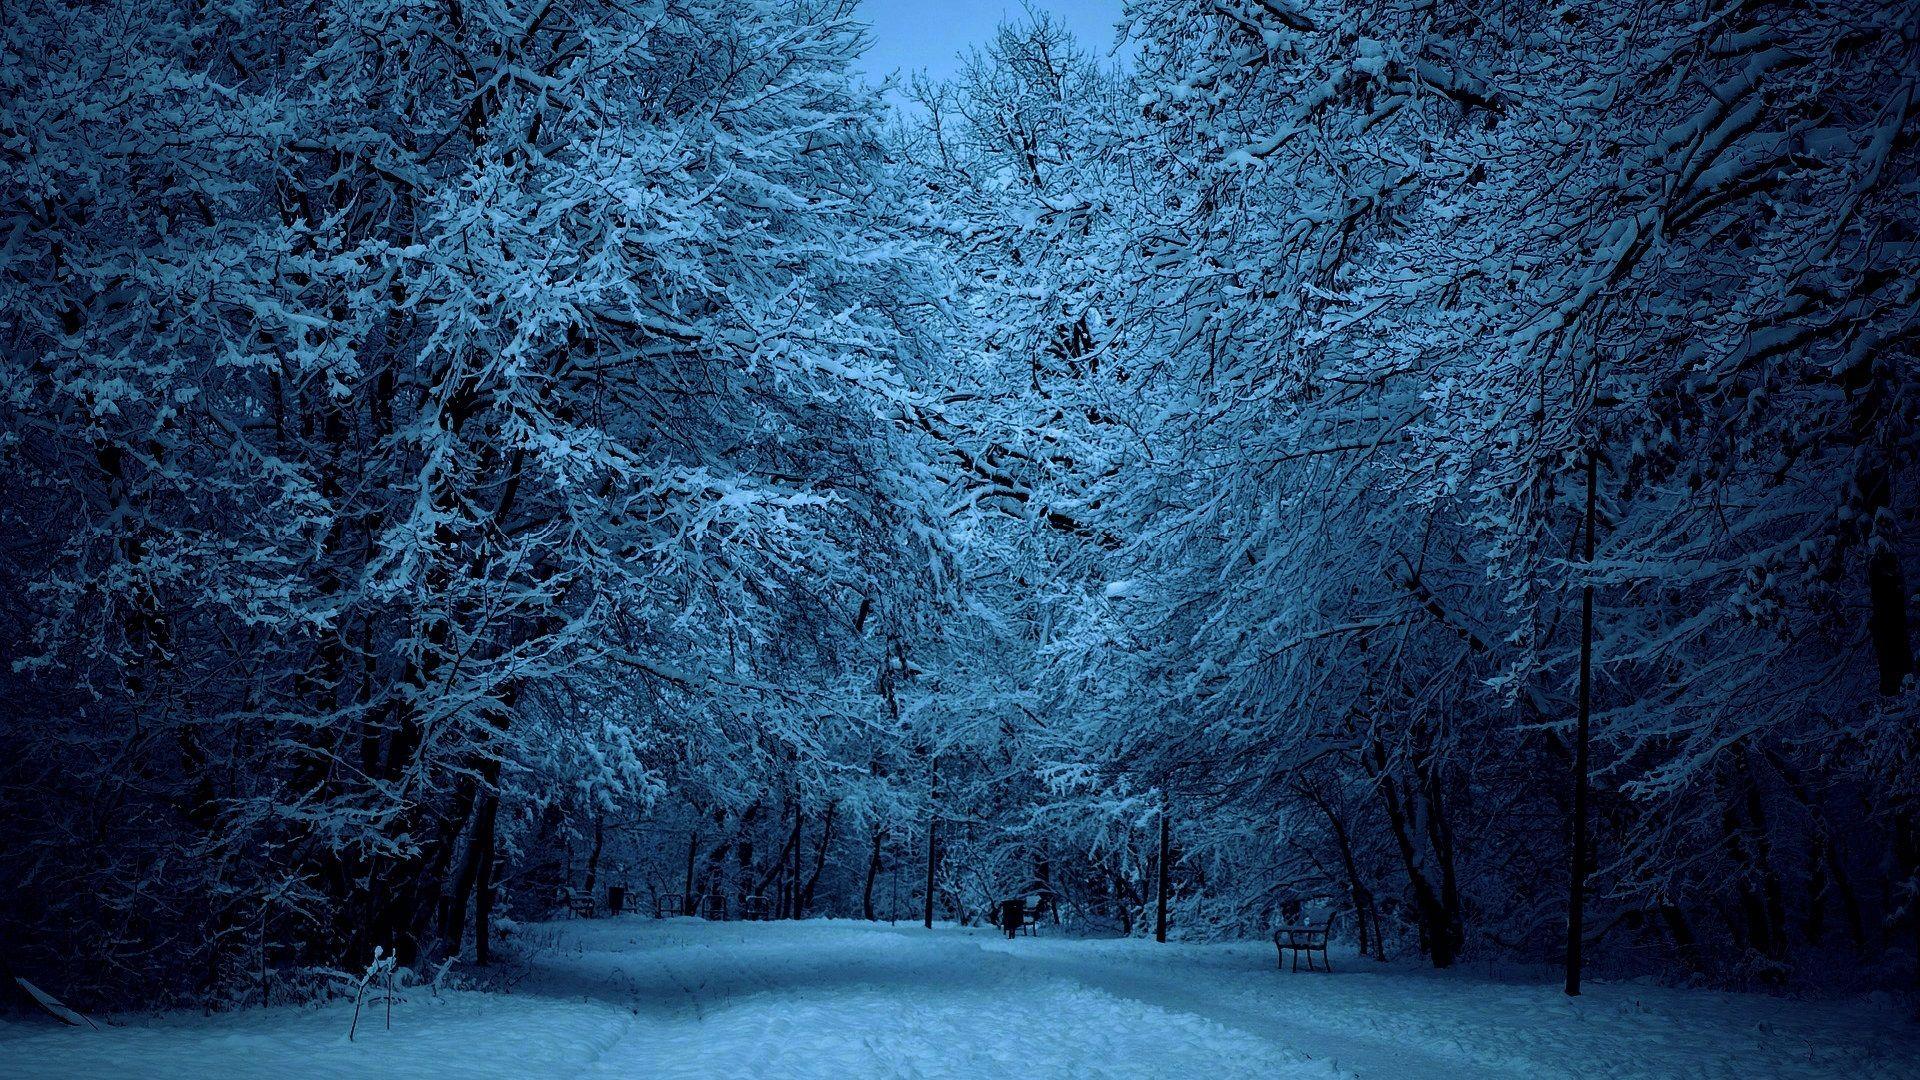 Winter Forest Night Image On Wallpaper 1080p HD